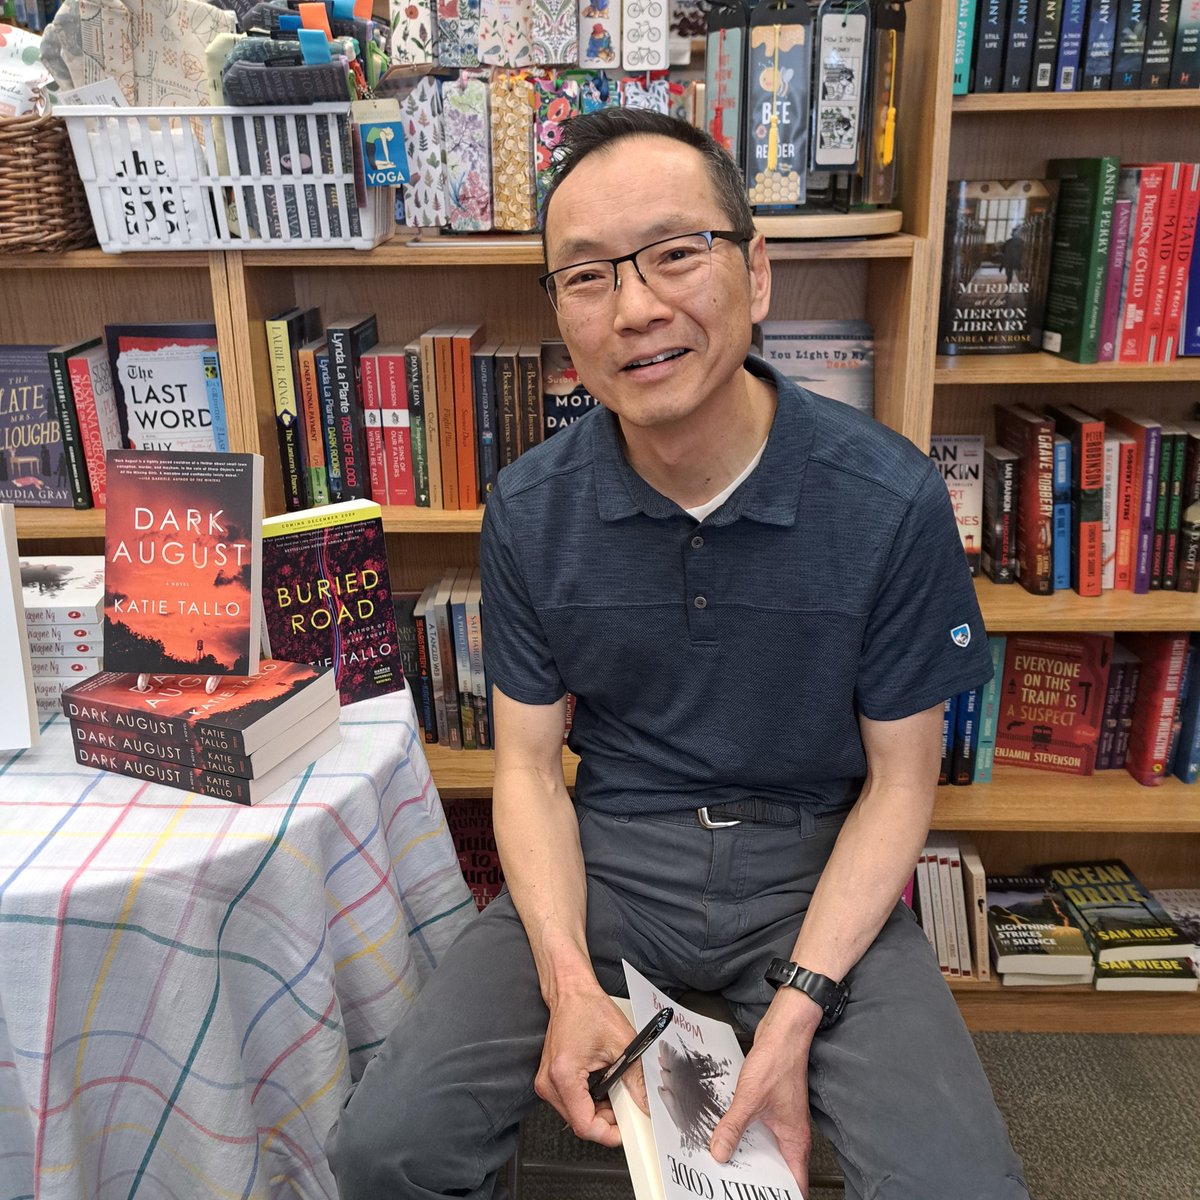 It was great meeting @WayneNgWrites on #CanadianIndependentBookstoreDay at @BeechwoodBooks in Ottawa! Wayne signed my copy of his novel, The Family Code, which I know will be a moving read. 📚